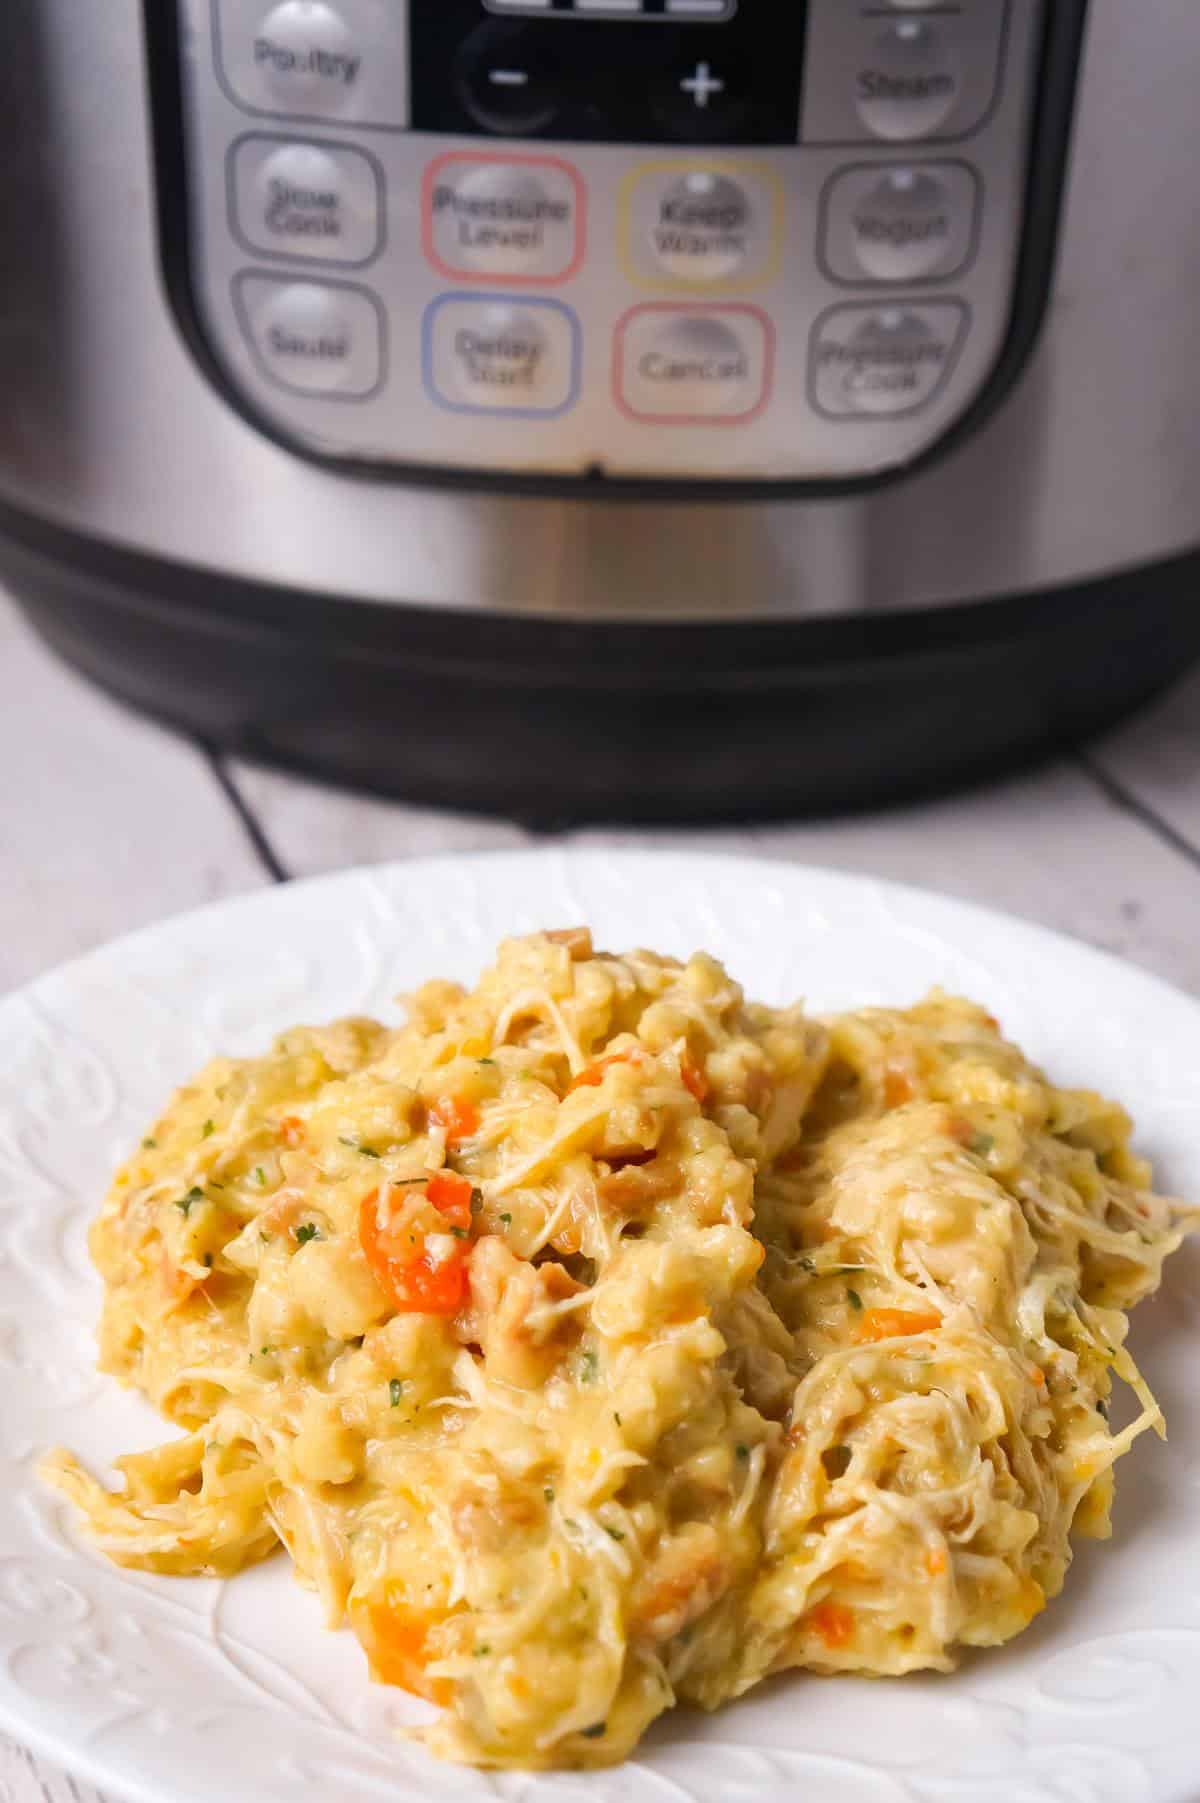 Instant Pot Chicken and Stuffing Casserole is an easy pressure cooker chicken recipe using boneless, skinless chicken breast, chopped veggies, cheddar cheese and stove top stuffing mix.